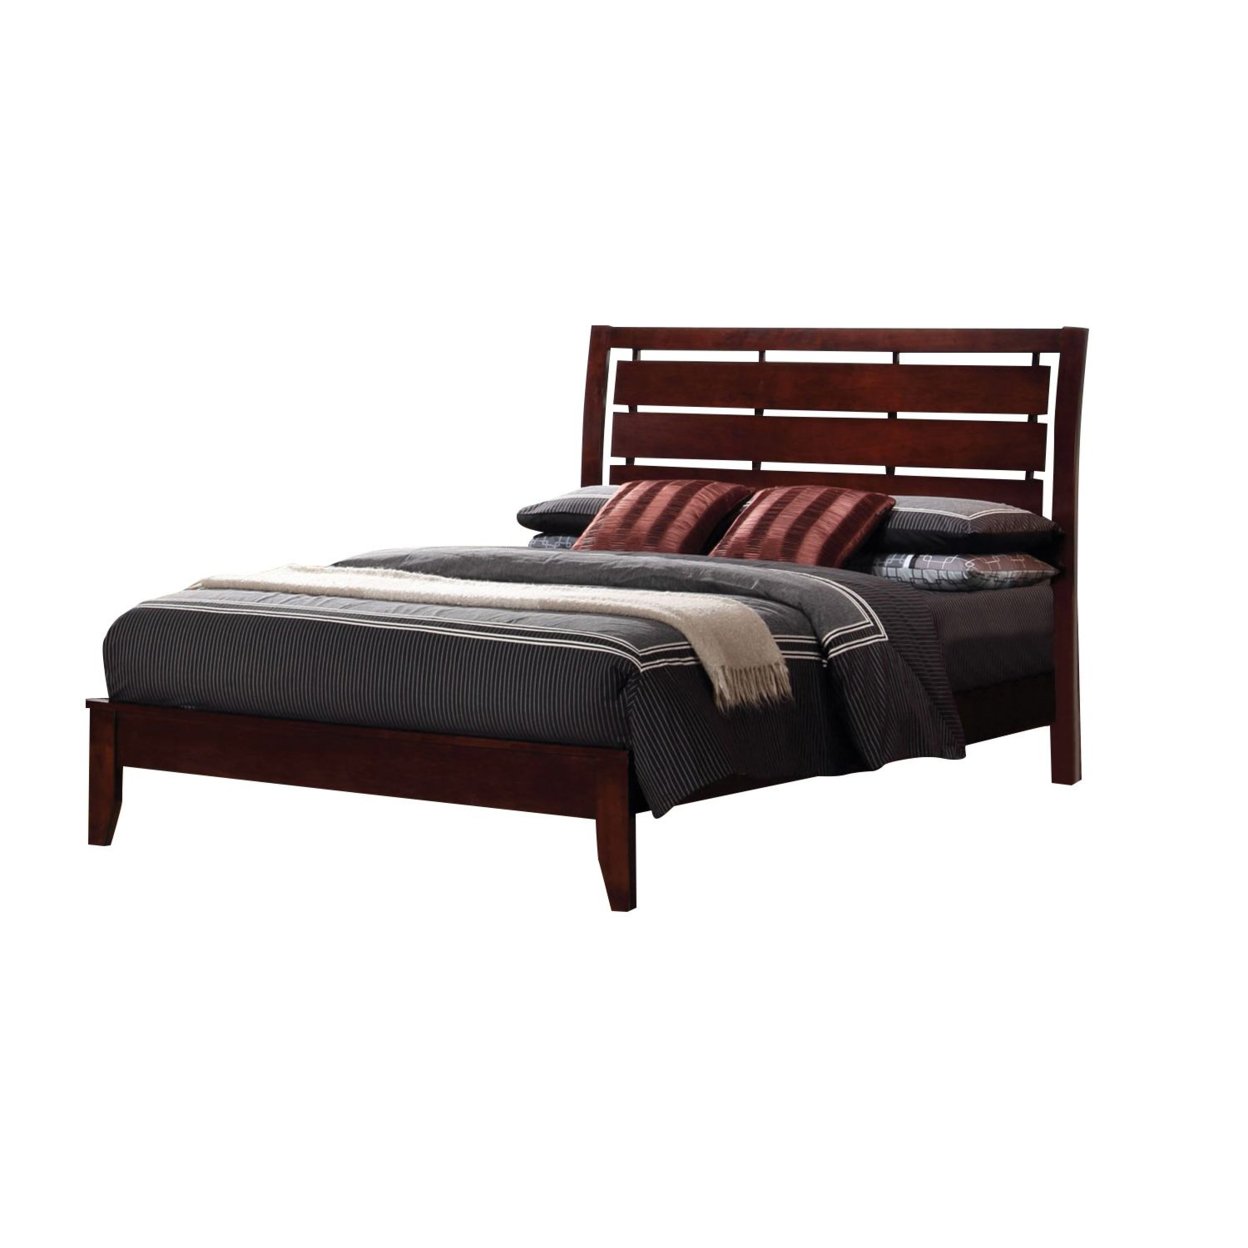 Transitional Wooden Full Size Bed With Slatted Style Headboard, Brown- Saltoro Sherpi